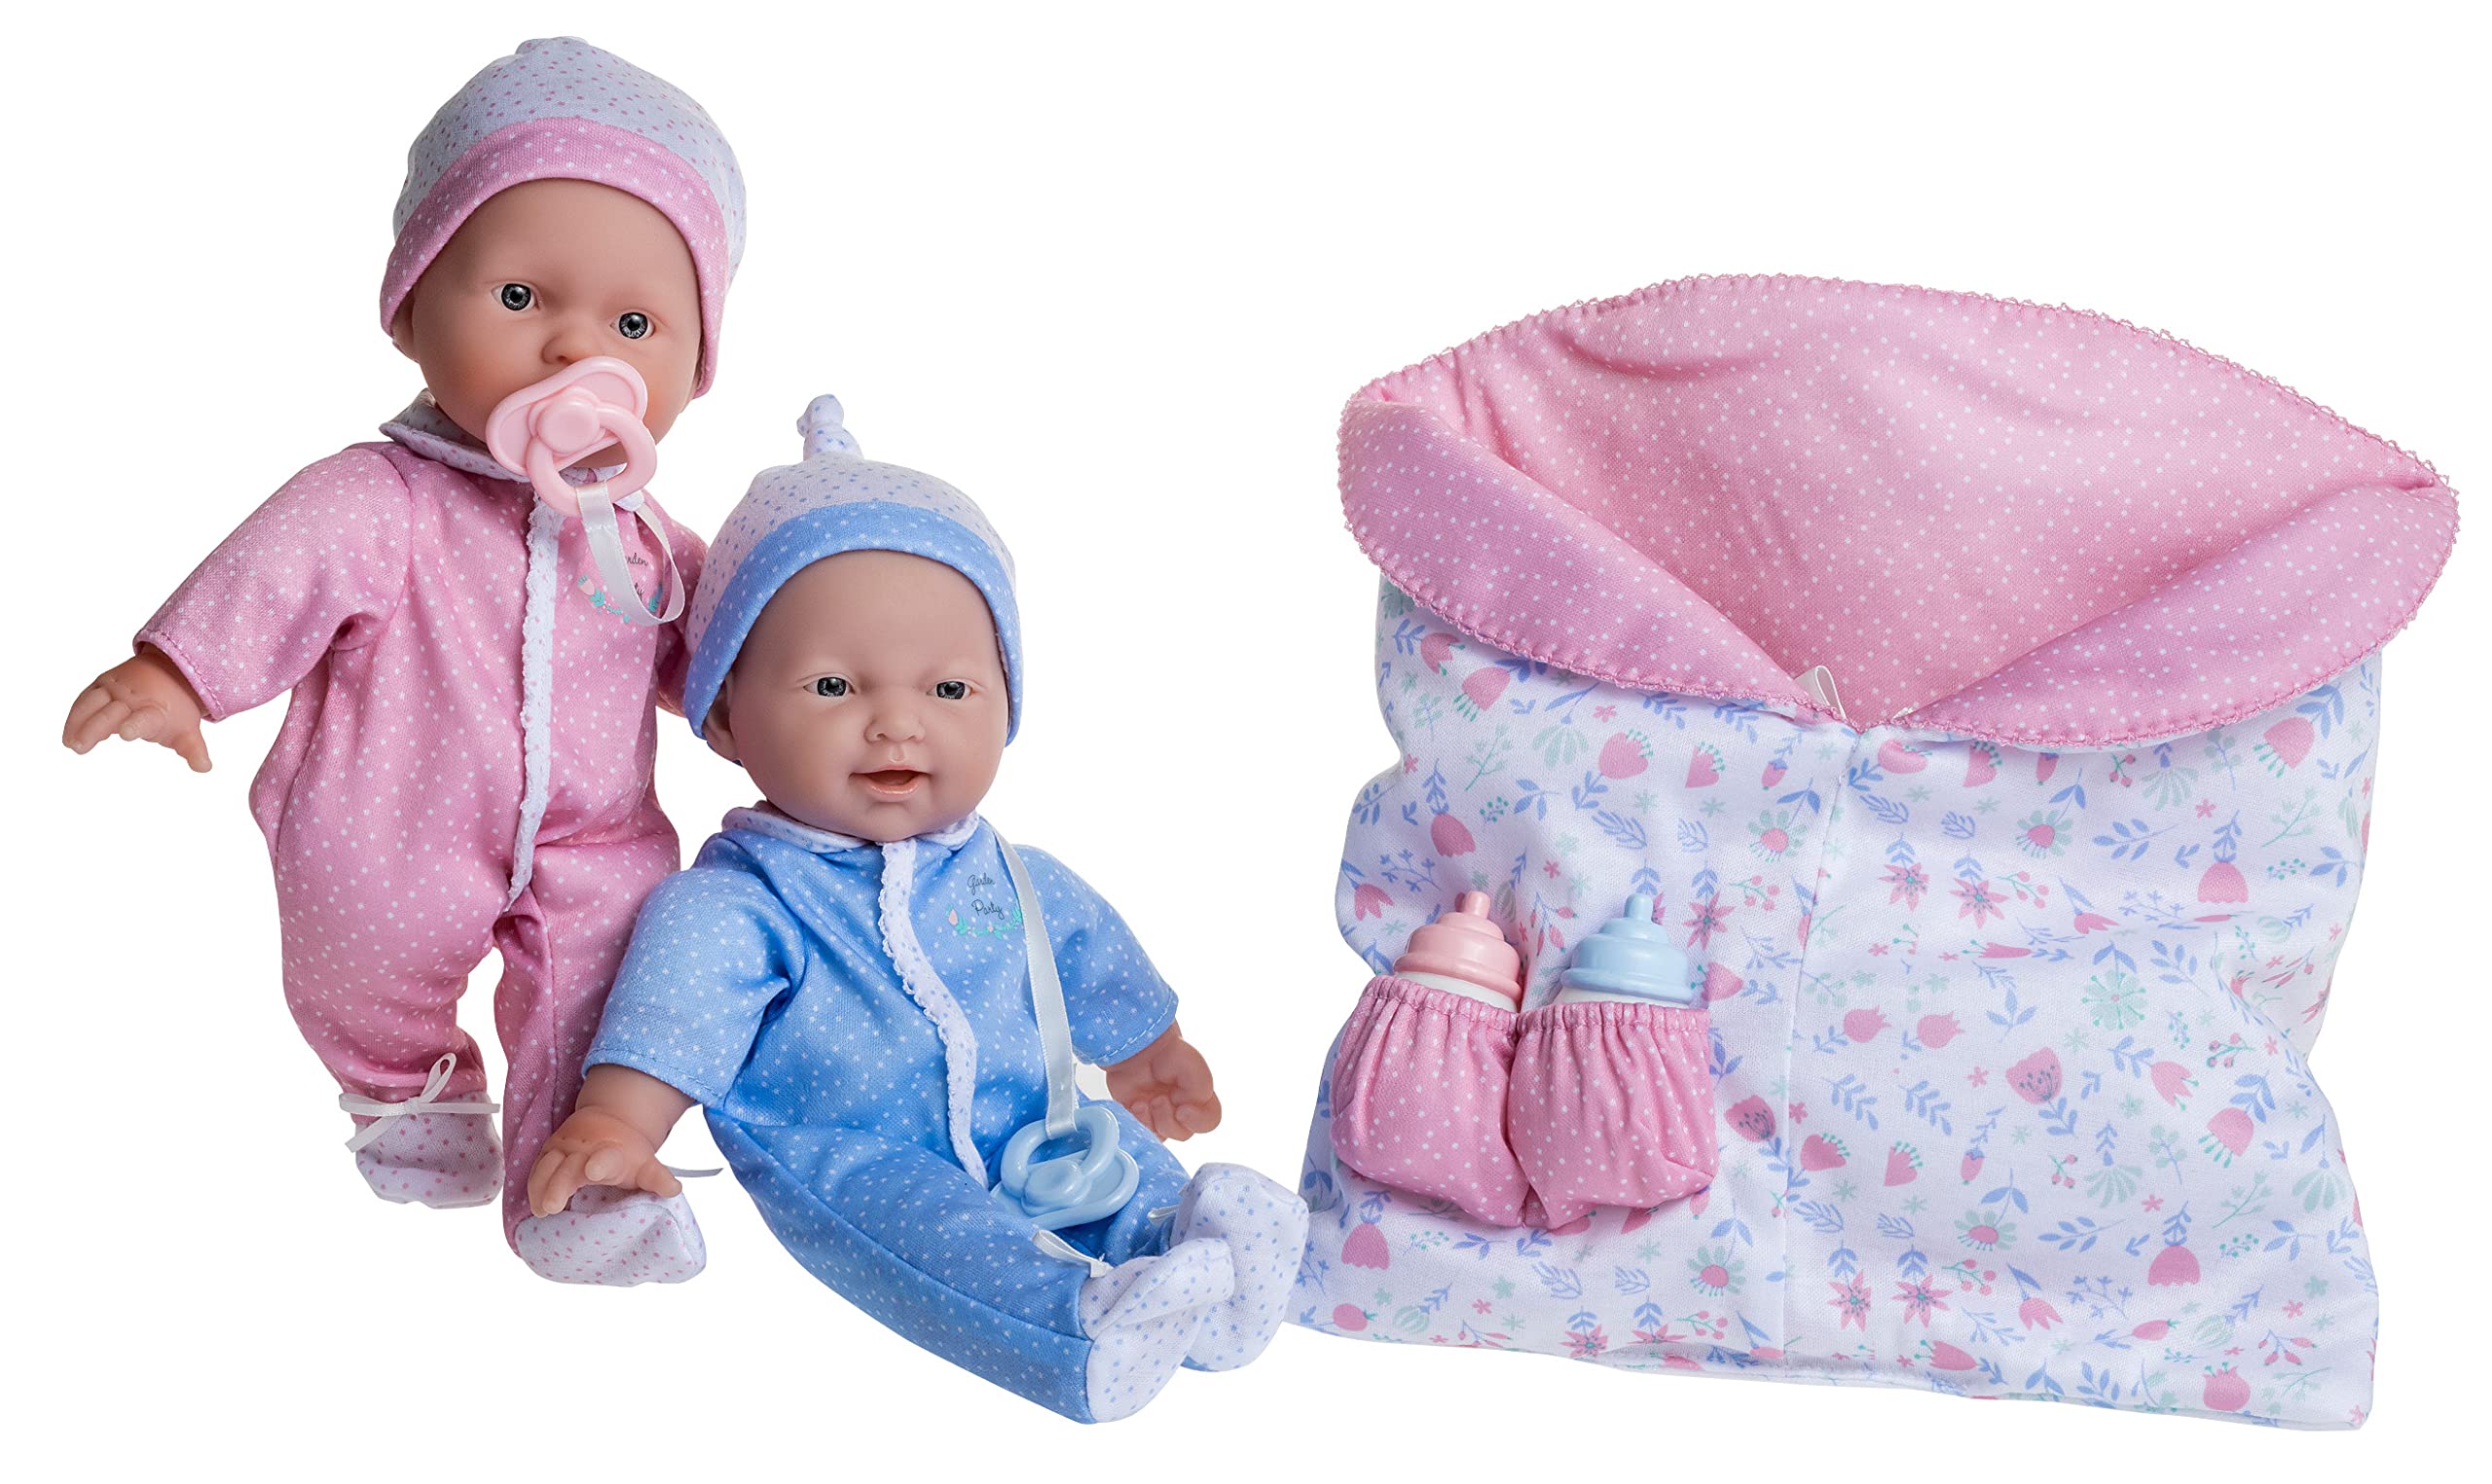 JC Toys La Baby Twins Sleeping Bag Gift Set |11-inch Small Soft Body Dolls Washable |Removable Pink and Blue Outfits, Pacifier & Blanket | 12 Months+